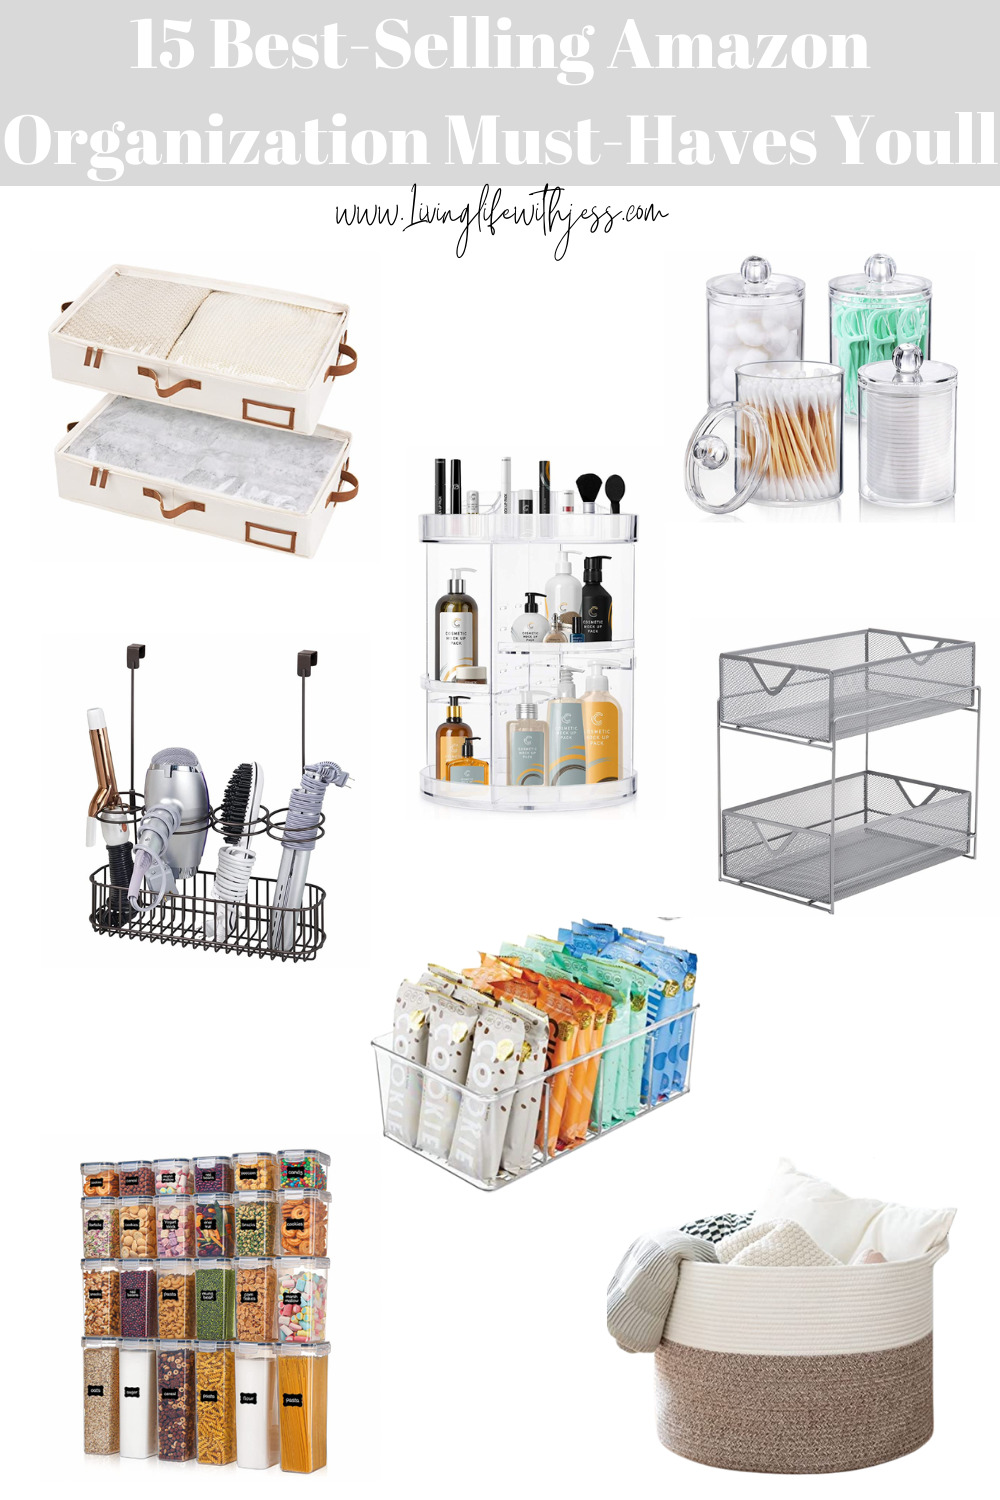 https://livinglifewithjess.com/wp-content/uploads/2022/03/15-best-selling-amazon-organization-must-haves.jpg